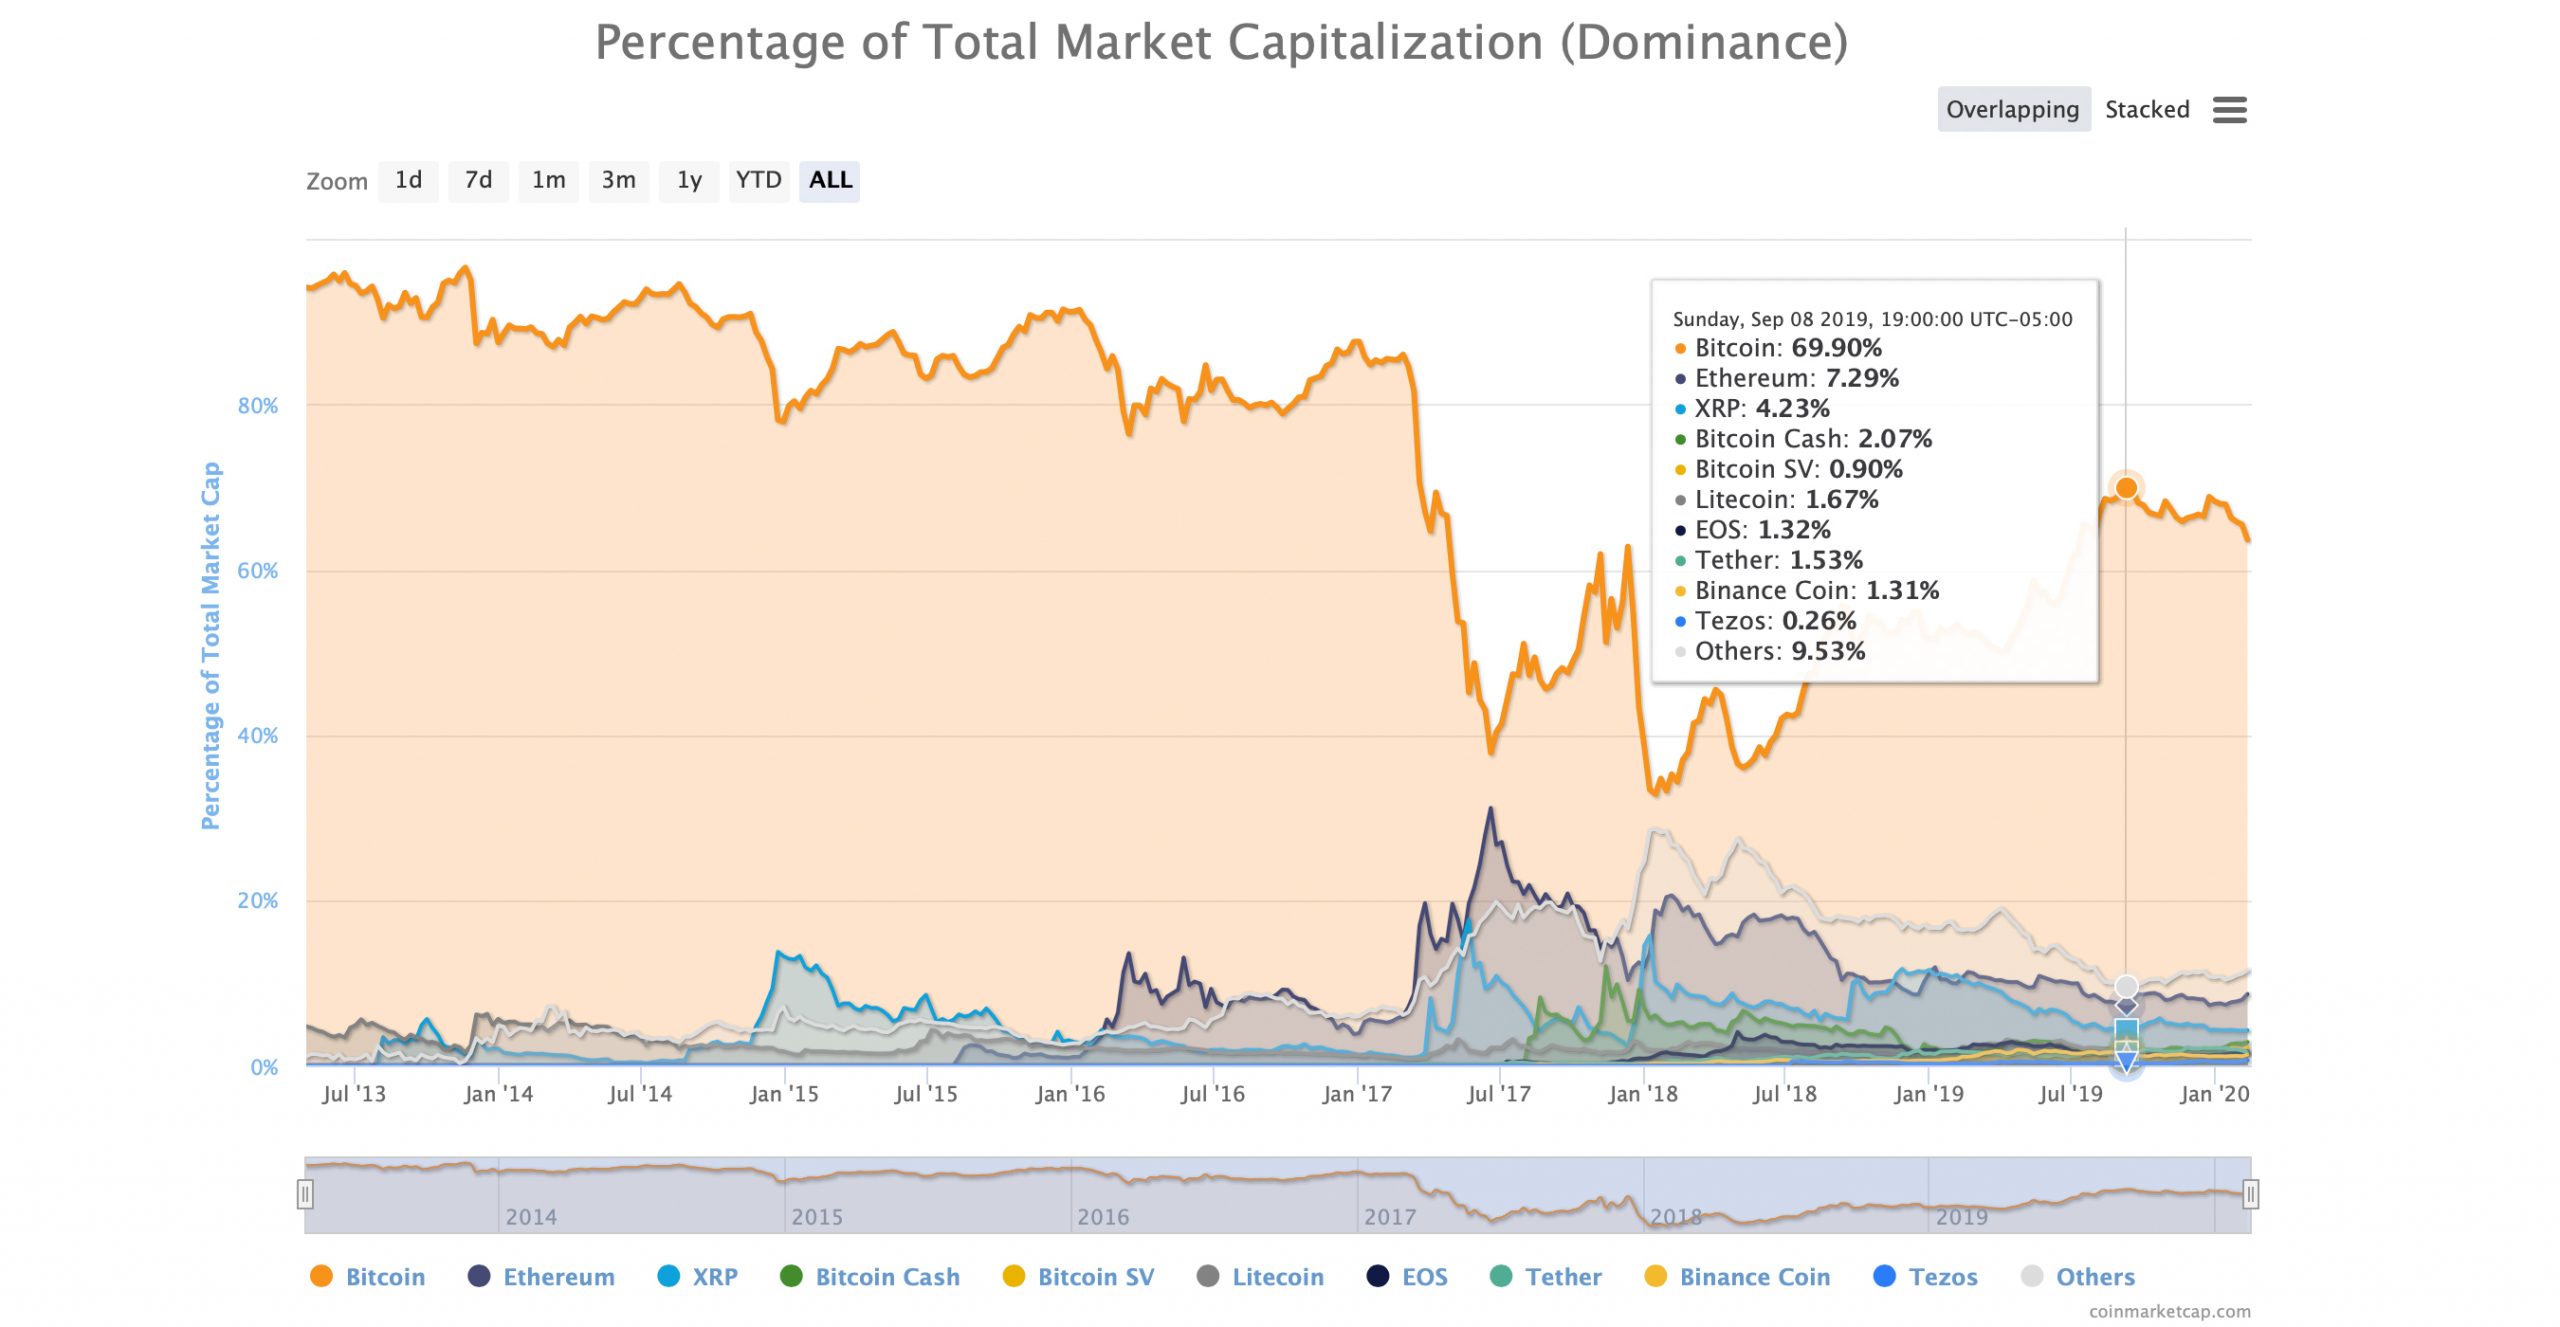 BTC’s Market Share Drops Consecutively for 14 Days - Dominance Ratio Slides to 60%